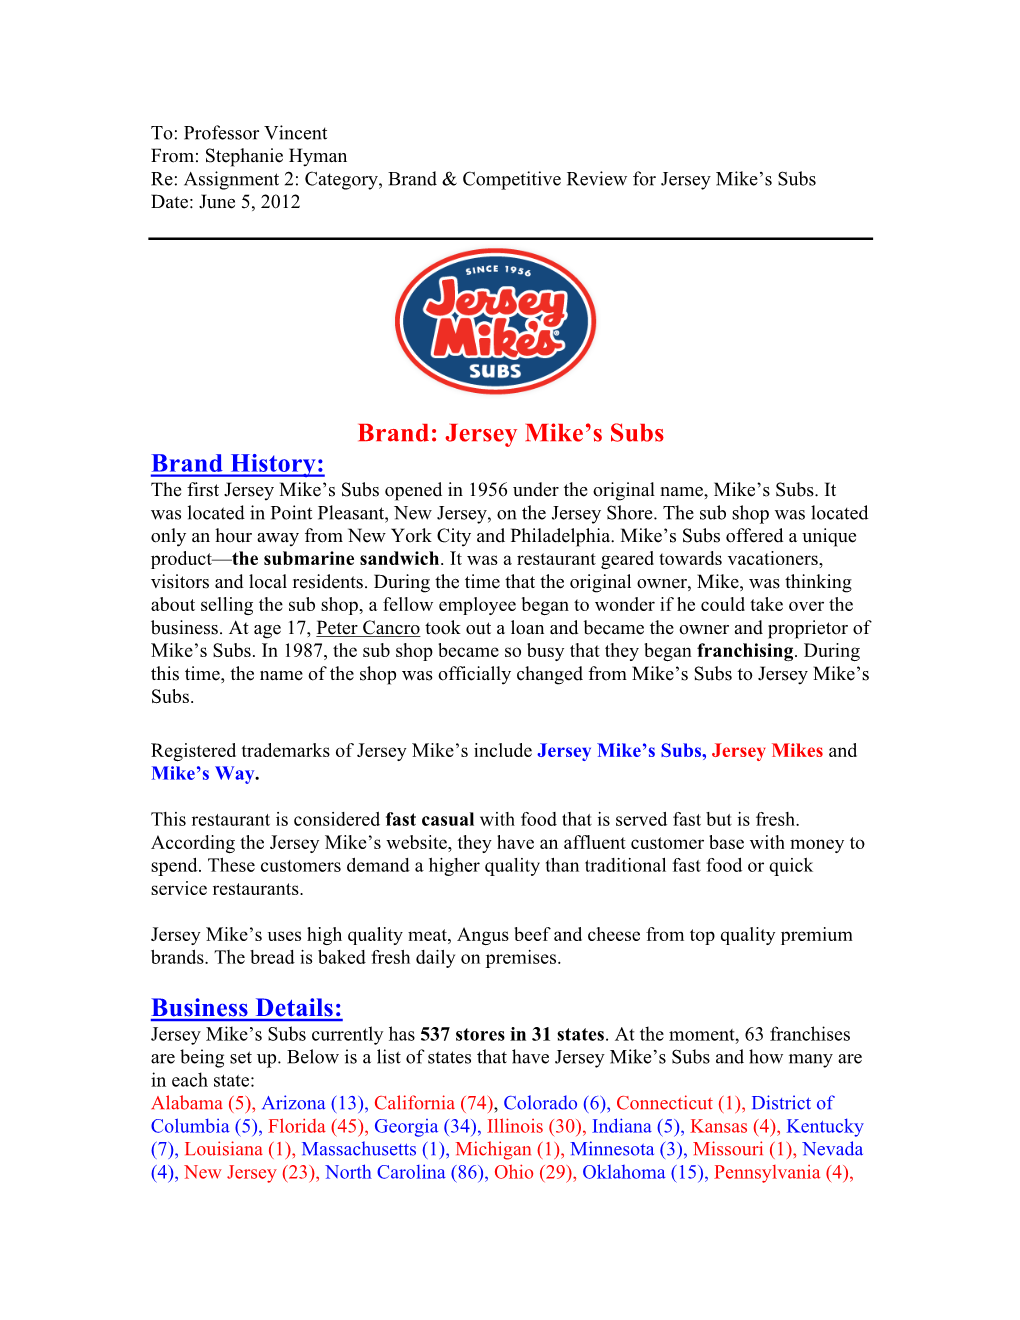 Jersey Mike's Subs Brand History